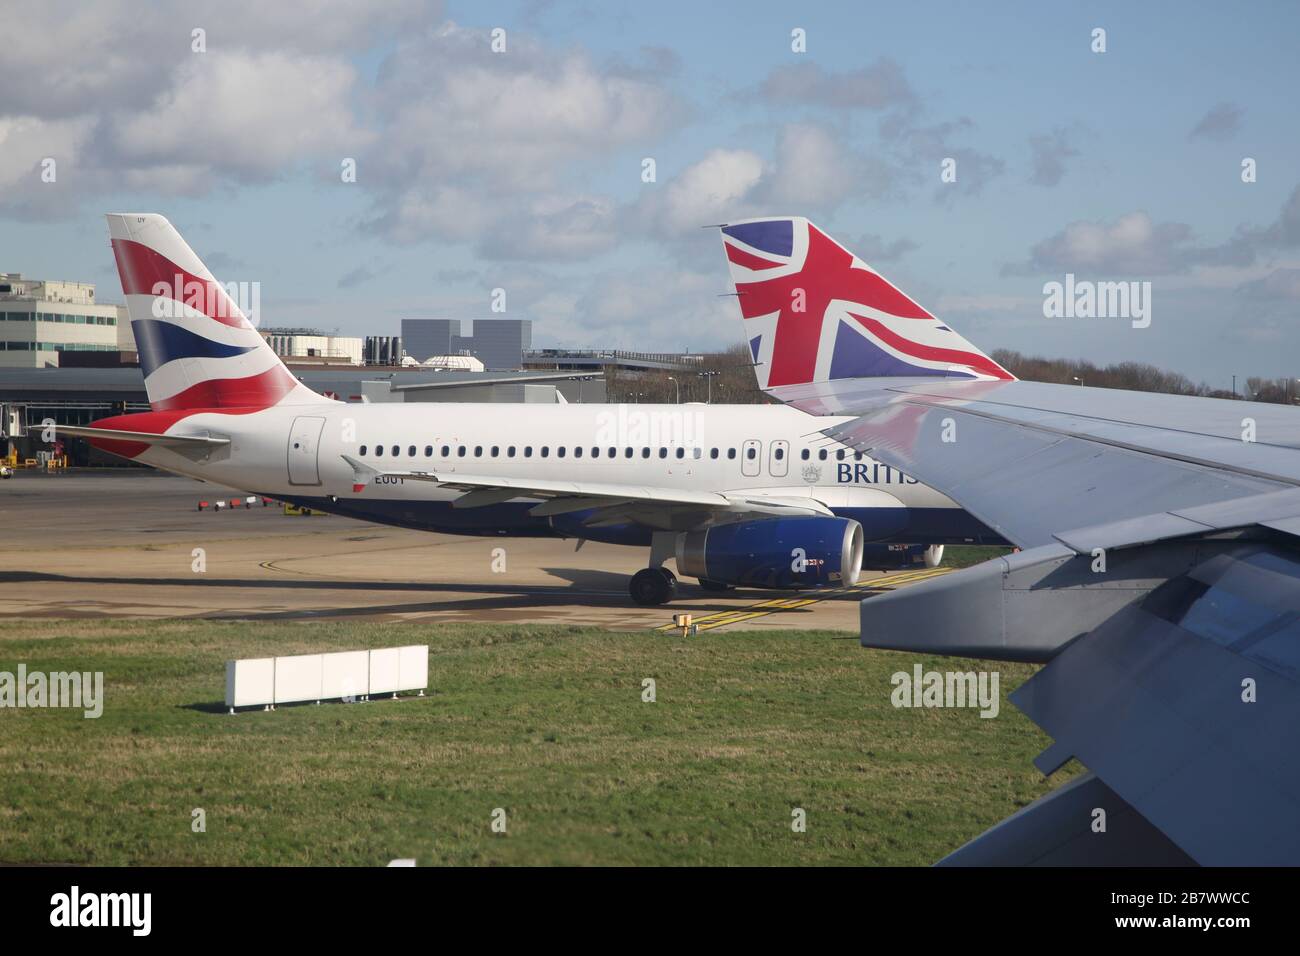 Gatwick Airport England  Aeroplane Boeing 747-400 (744)  Wing showing  Union Jack Design on Wing Tip Stock Photo